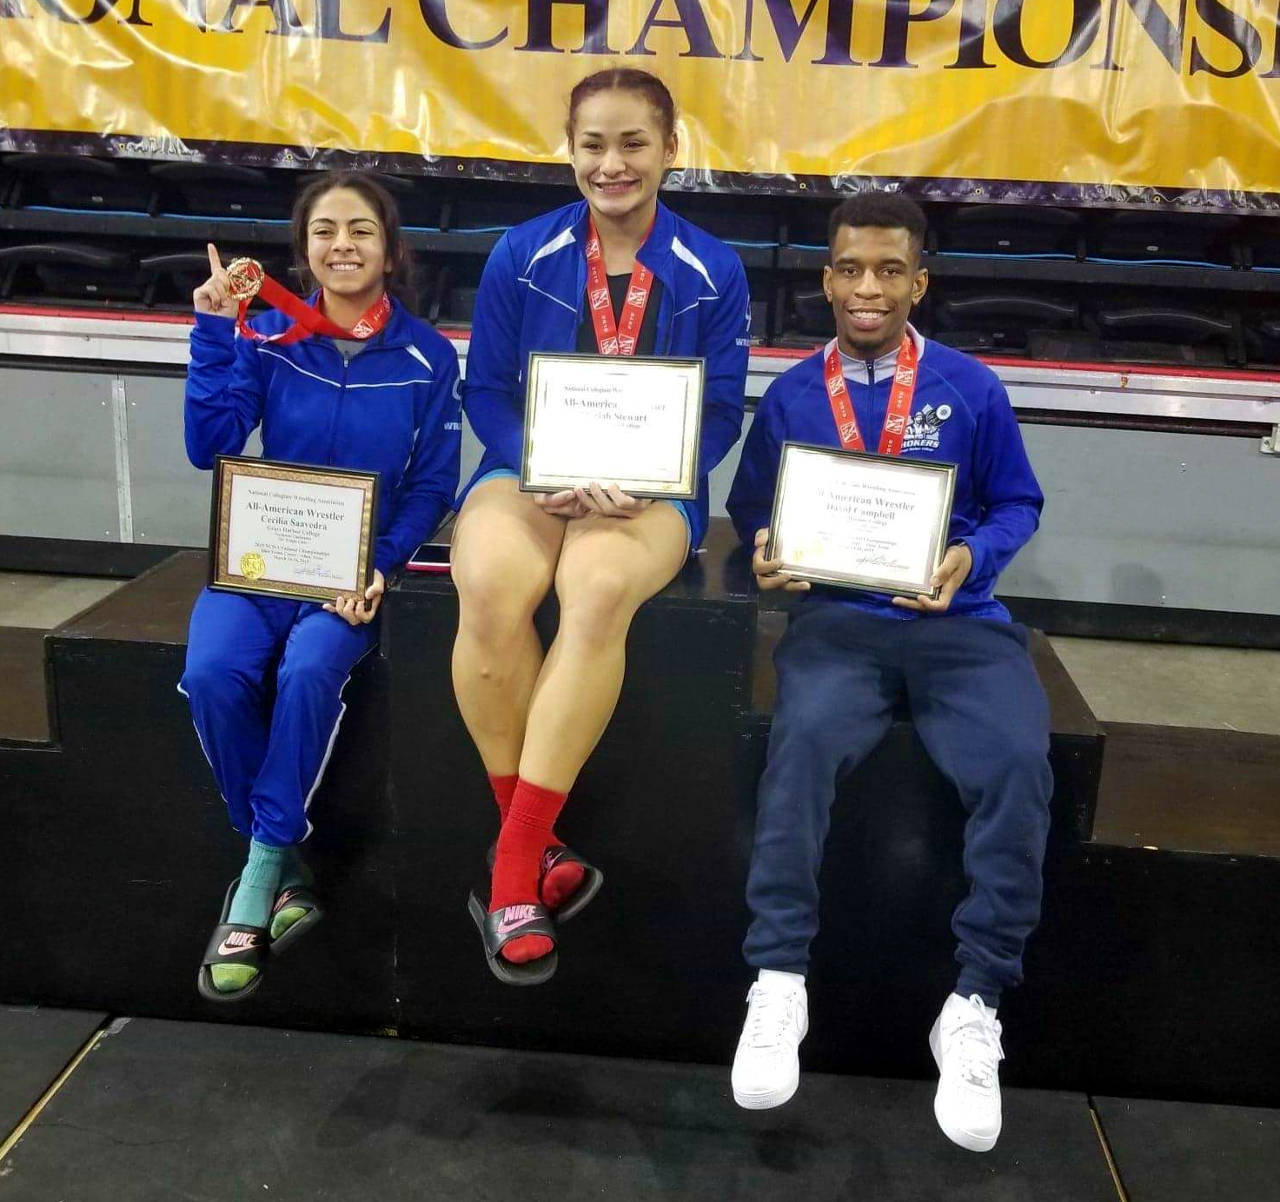 Grays Harbor College’s 2019 NCWA National Champions (from left): Ceci Saavedra, Mariah Stewart and David Campbell. (Submitted Photo)